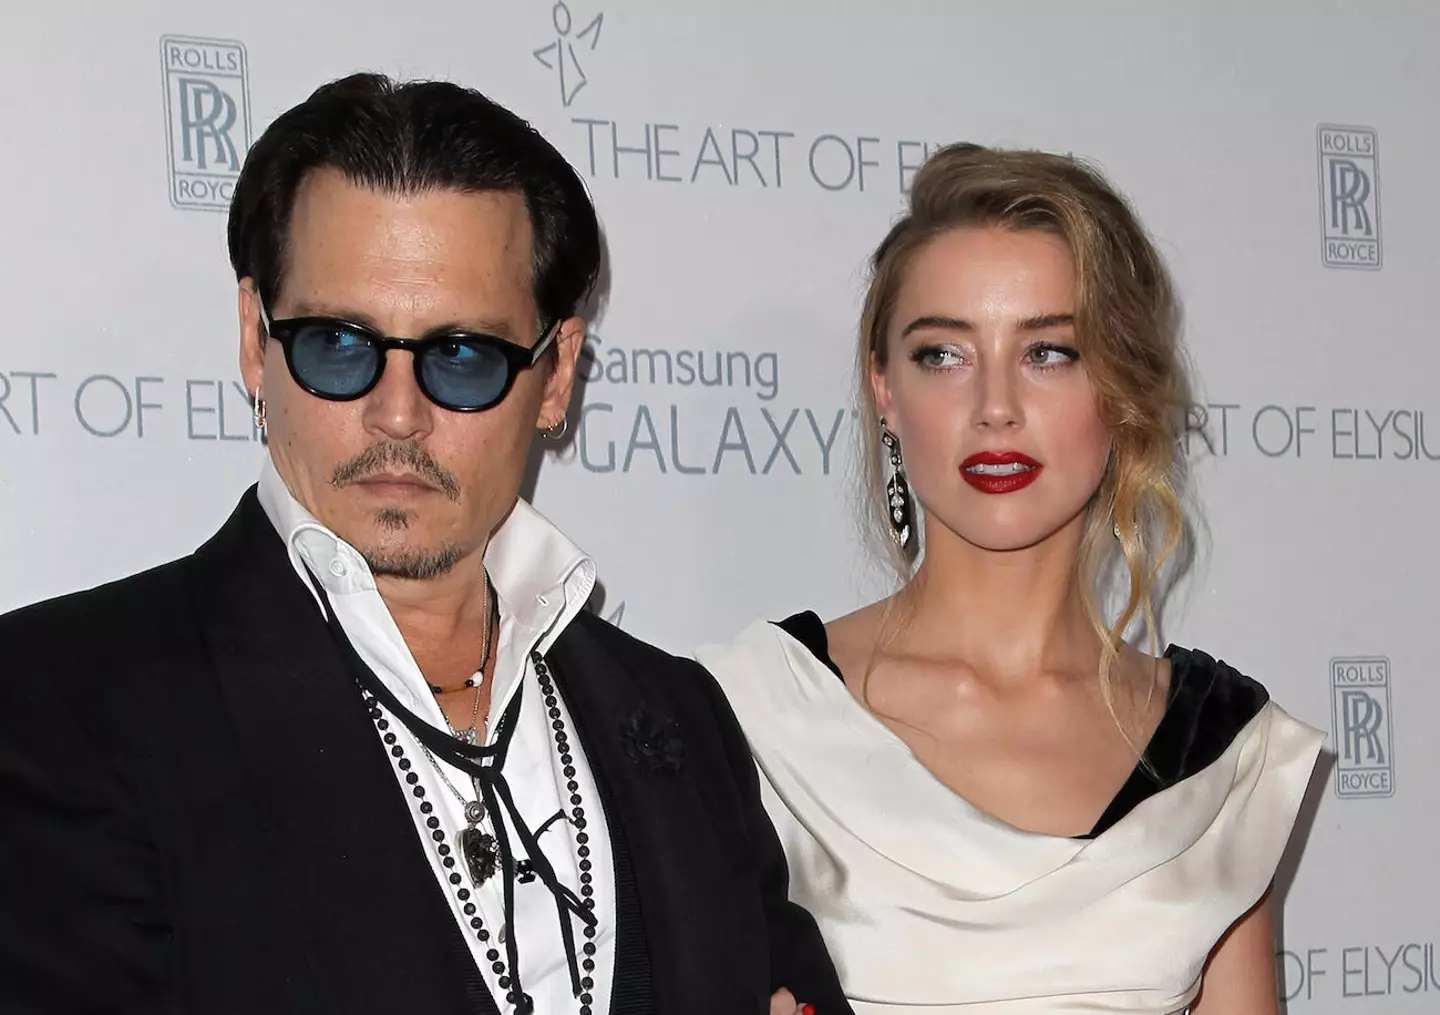 On June 1, the Pirates of the Caribbean actor was able to prove that Amber Heard's 2018 article in The Washington Post was defamatory and won $15 million (£12 million), later capped at $10.35 million (£8.27 million) by Judge Penny Azcarate.